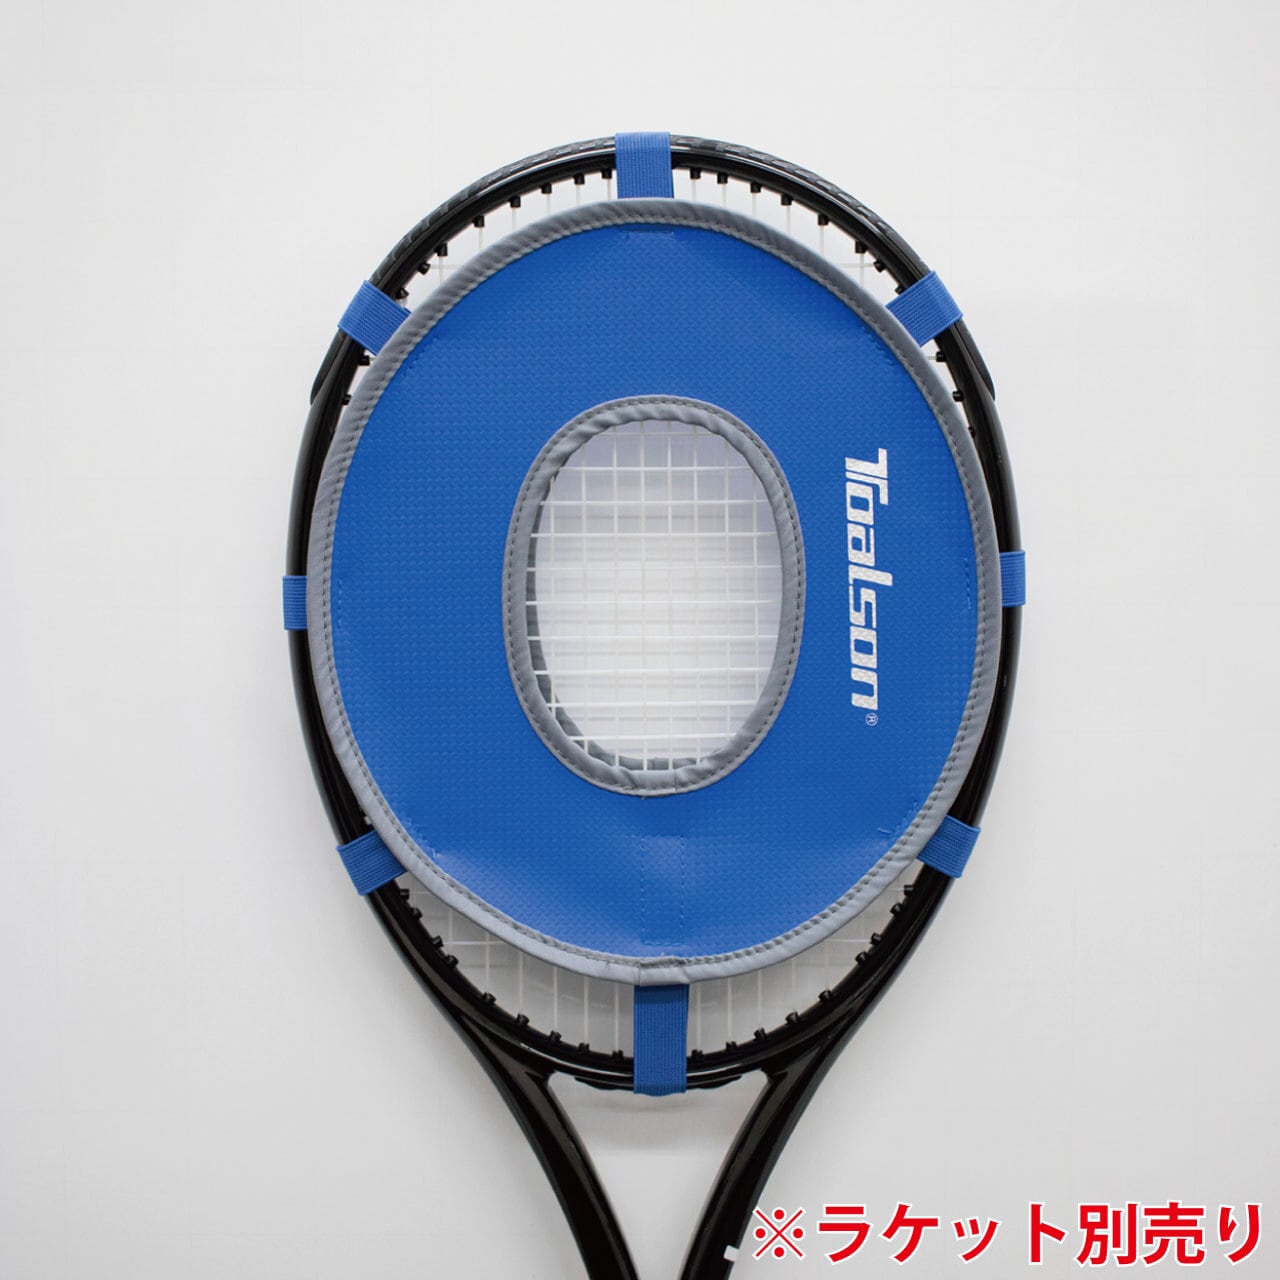 POWER SWING RACKET 500【1DR95000】/トアルソン TOALSON | トアルソン